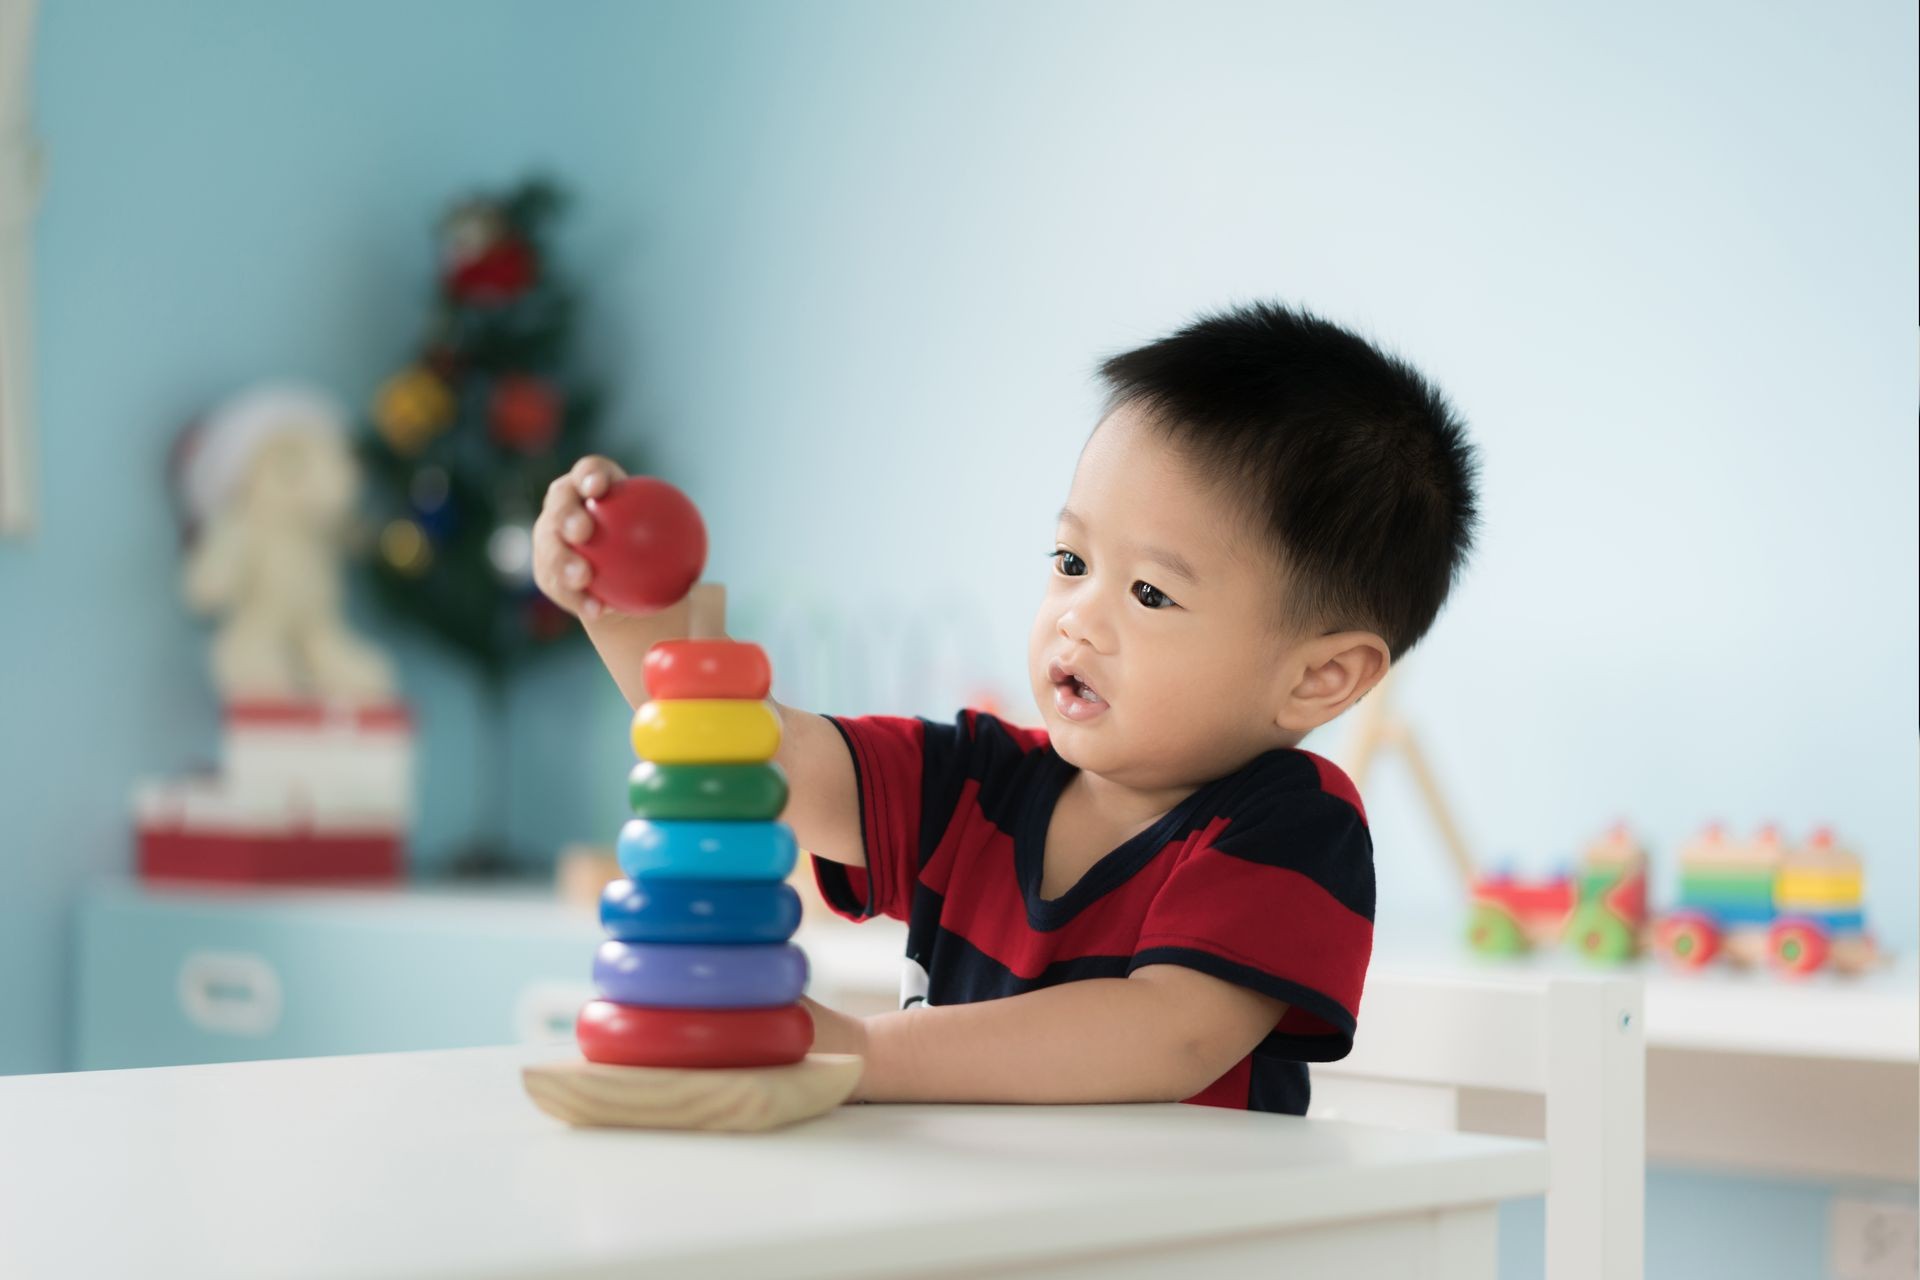 Adorable Asian Toddler baby boy sitting on chair and playing with color developmental toys at home.
